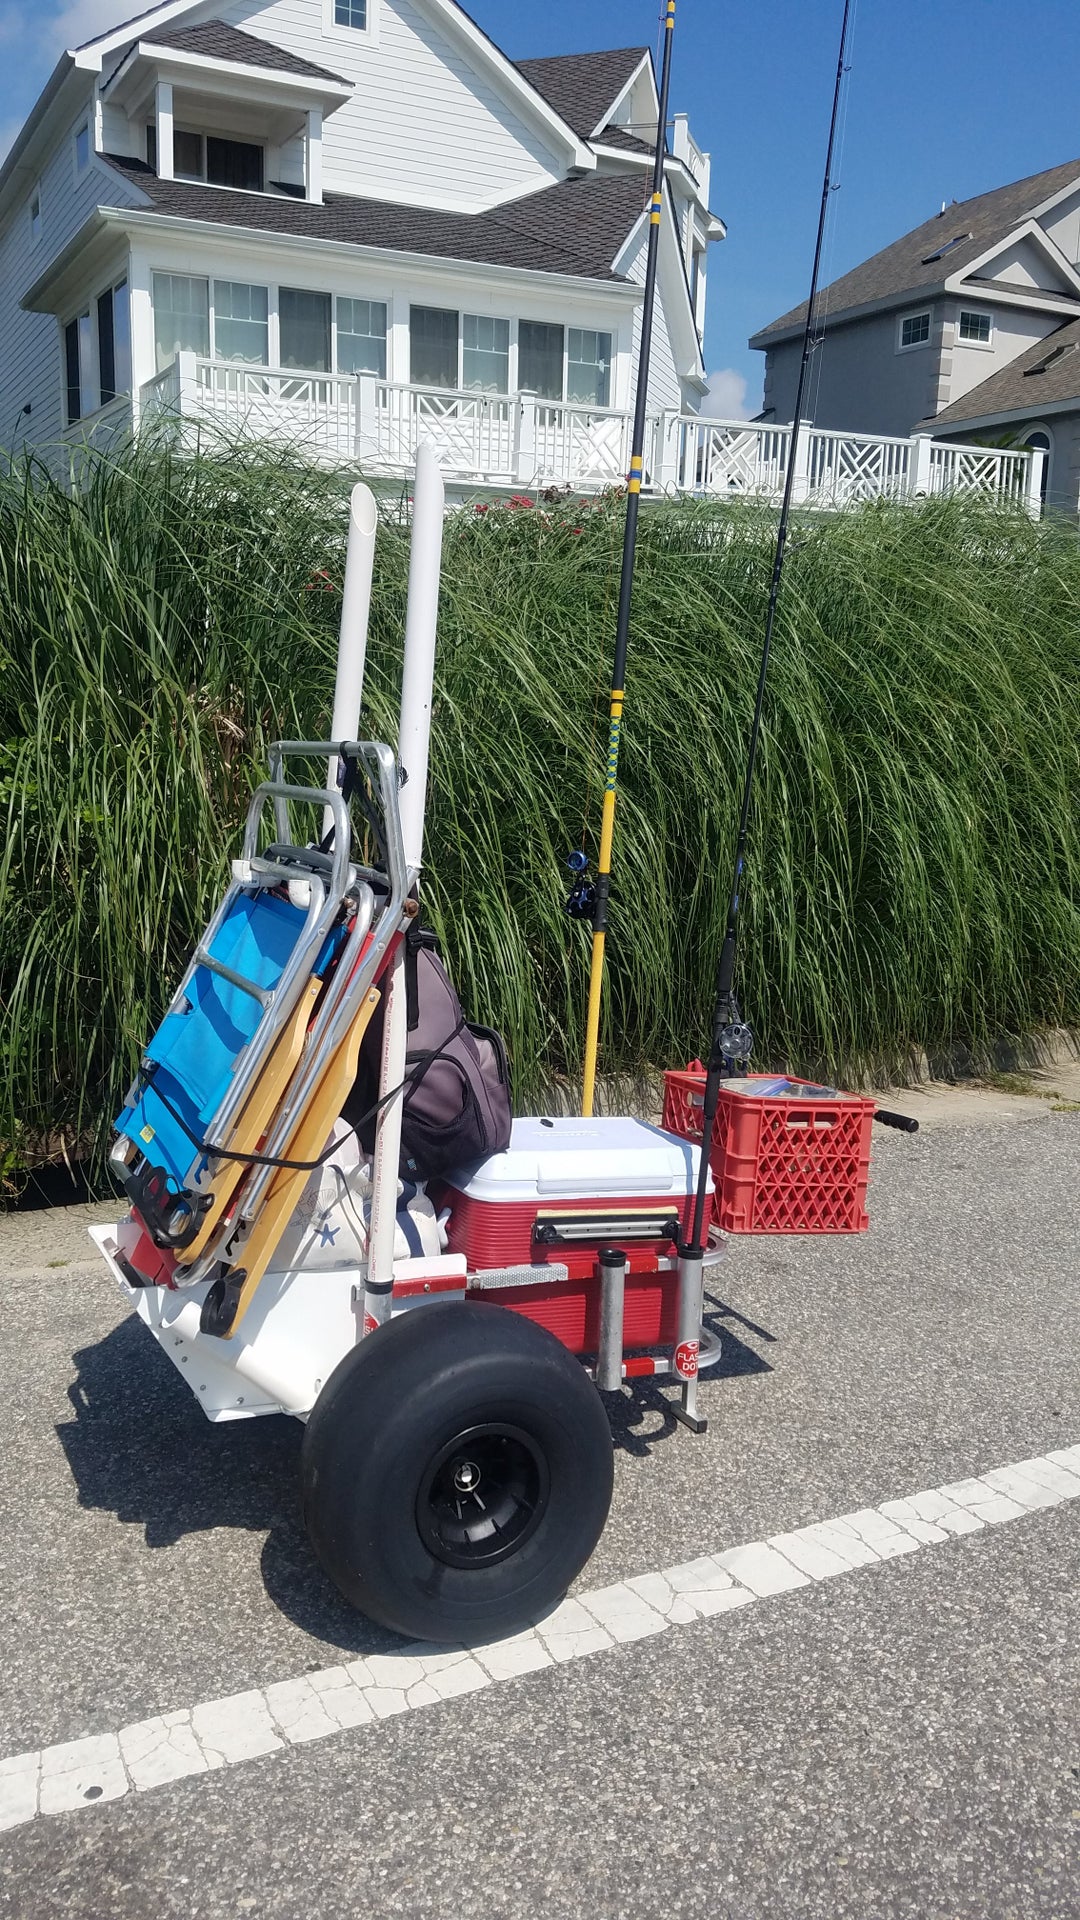 Anglers Fish'n'mate cart sizes? What works for you? What's overkill?